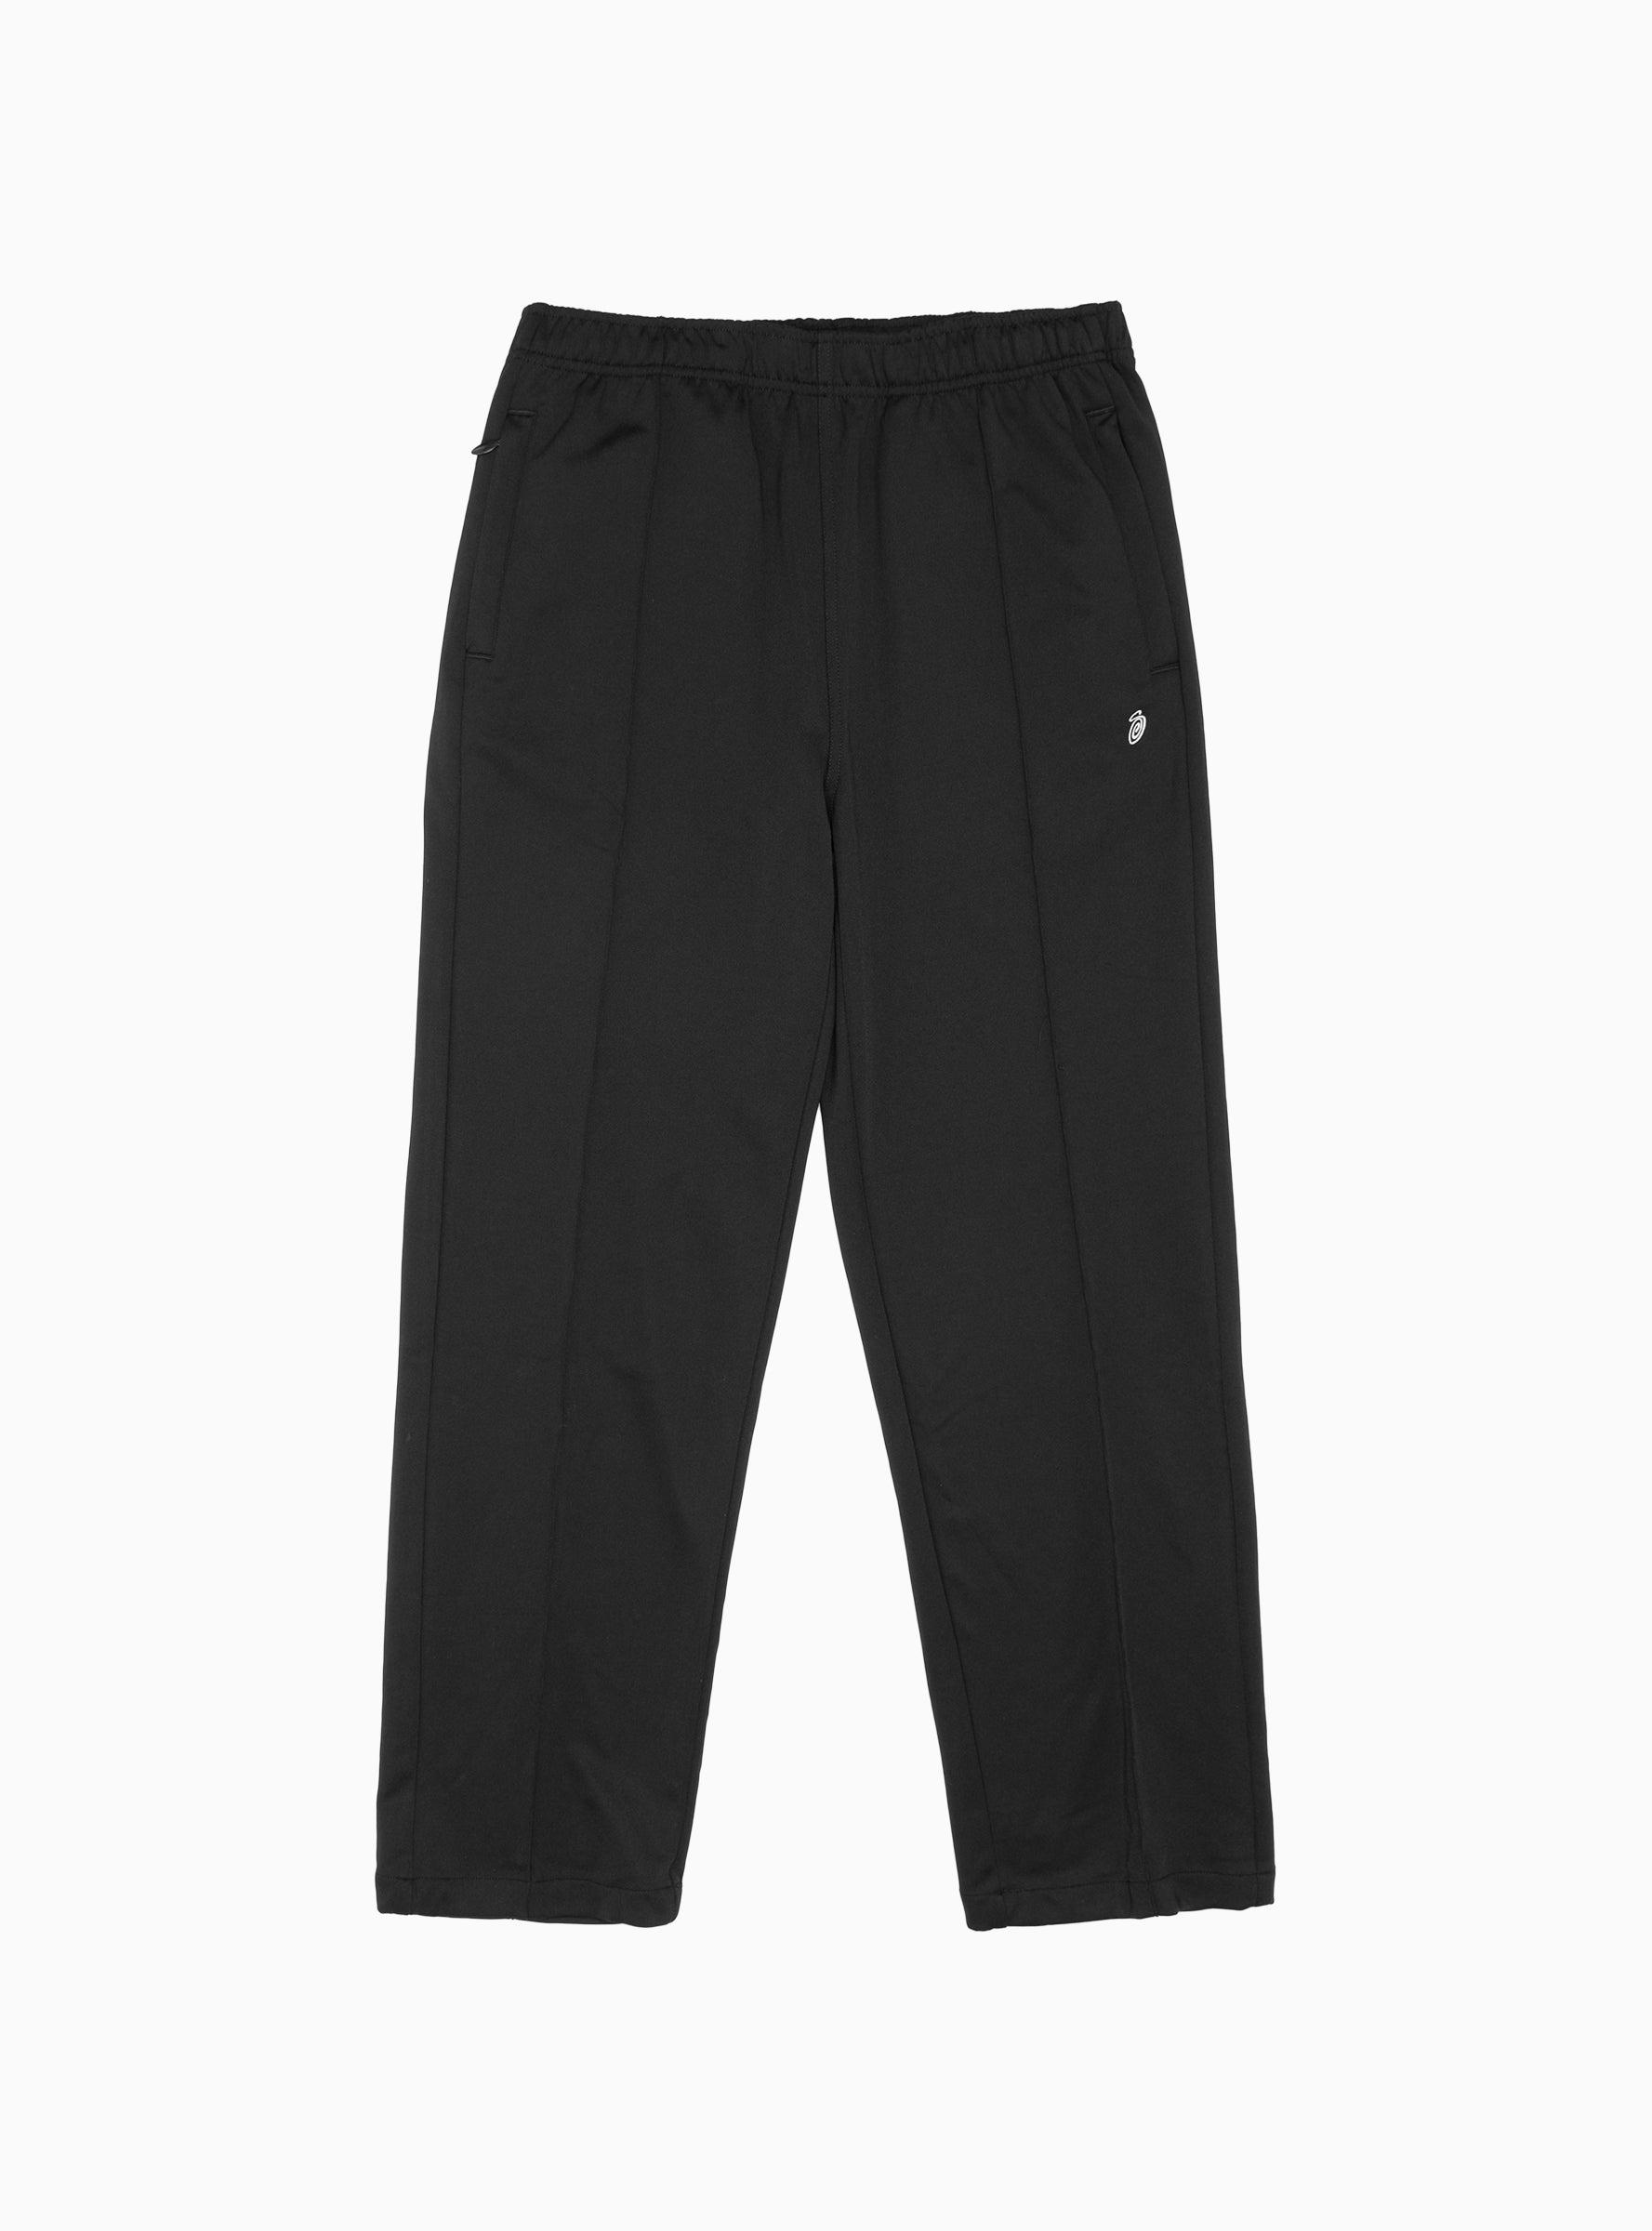 Stussy Poly Track Pants Black for Men   Lyst Canada